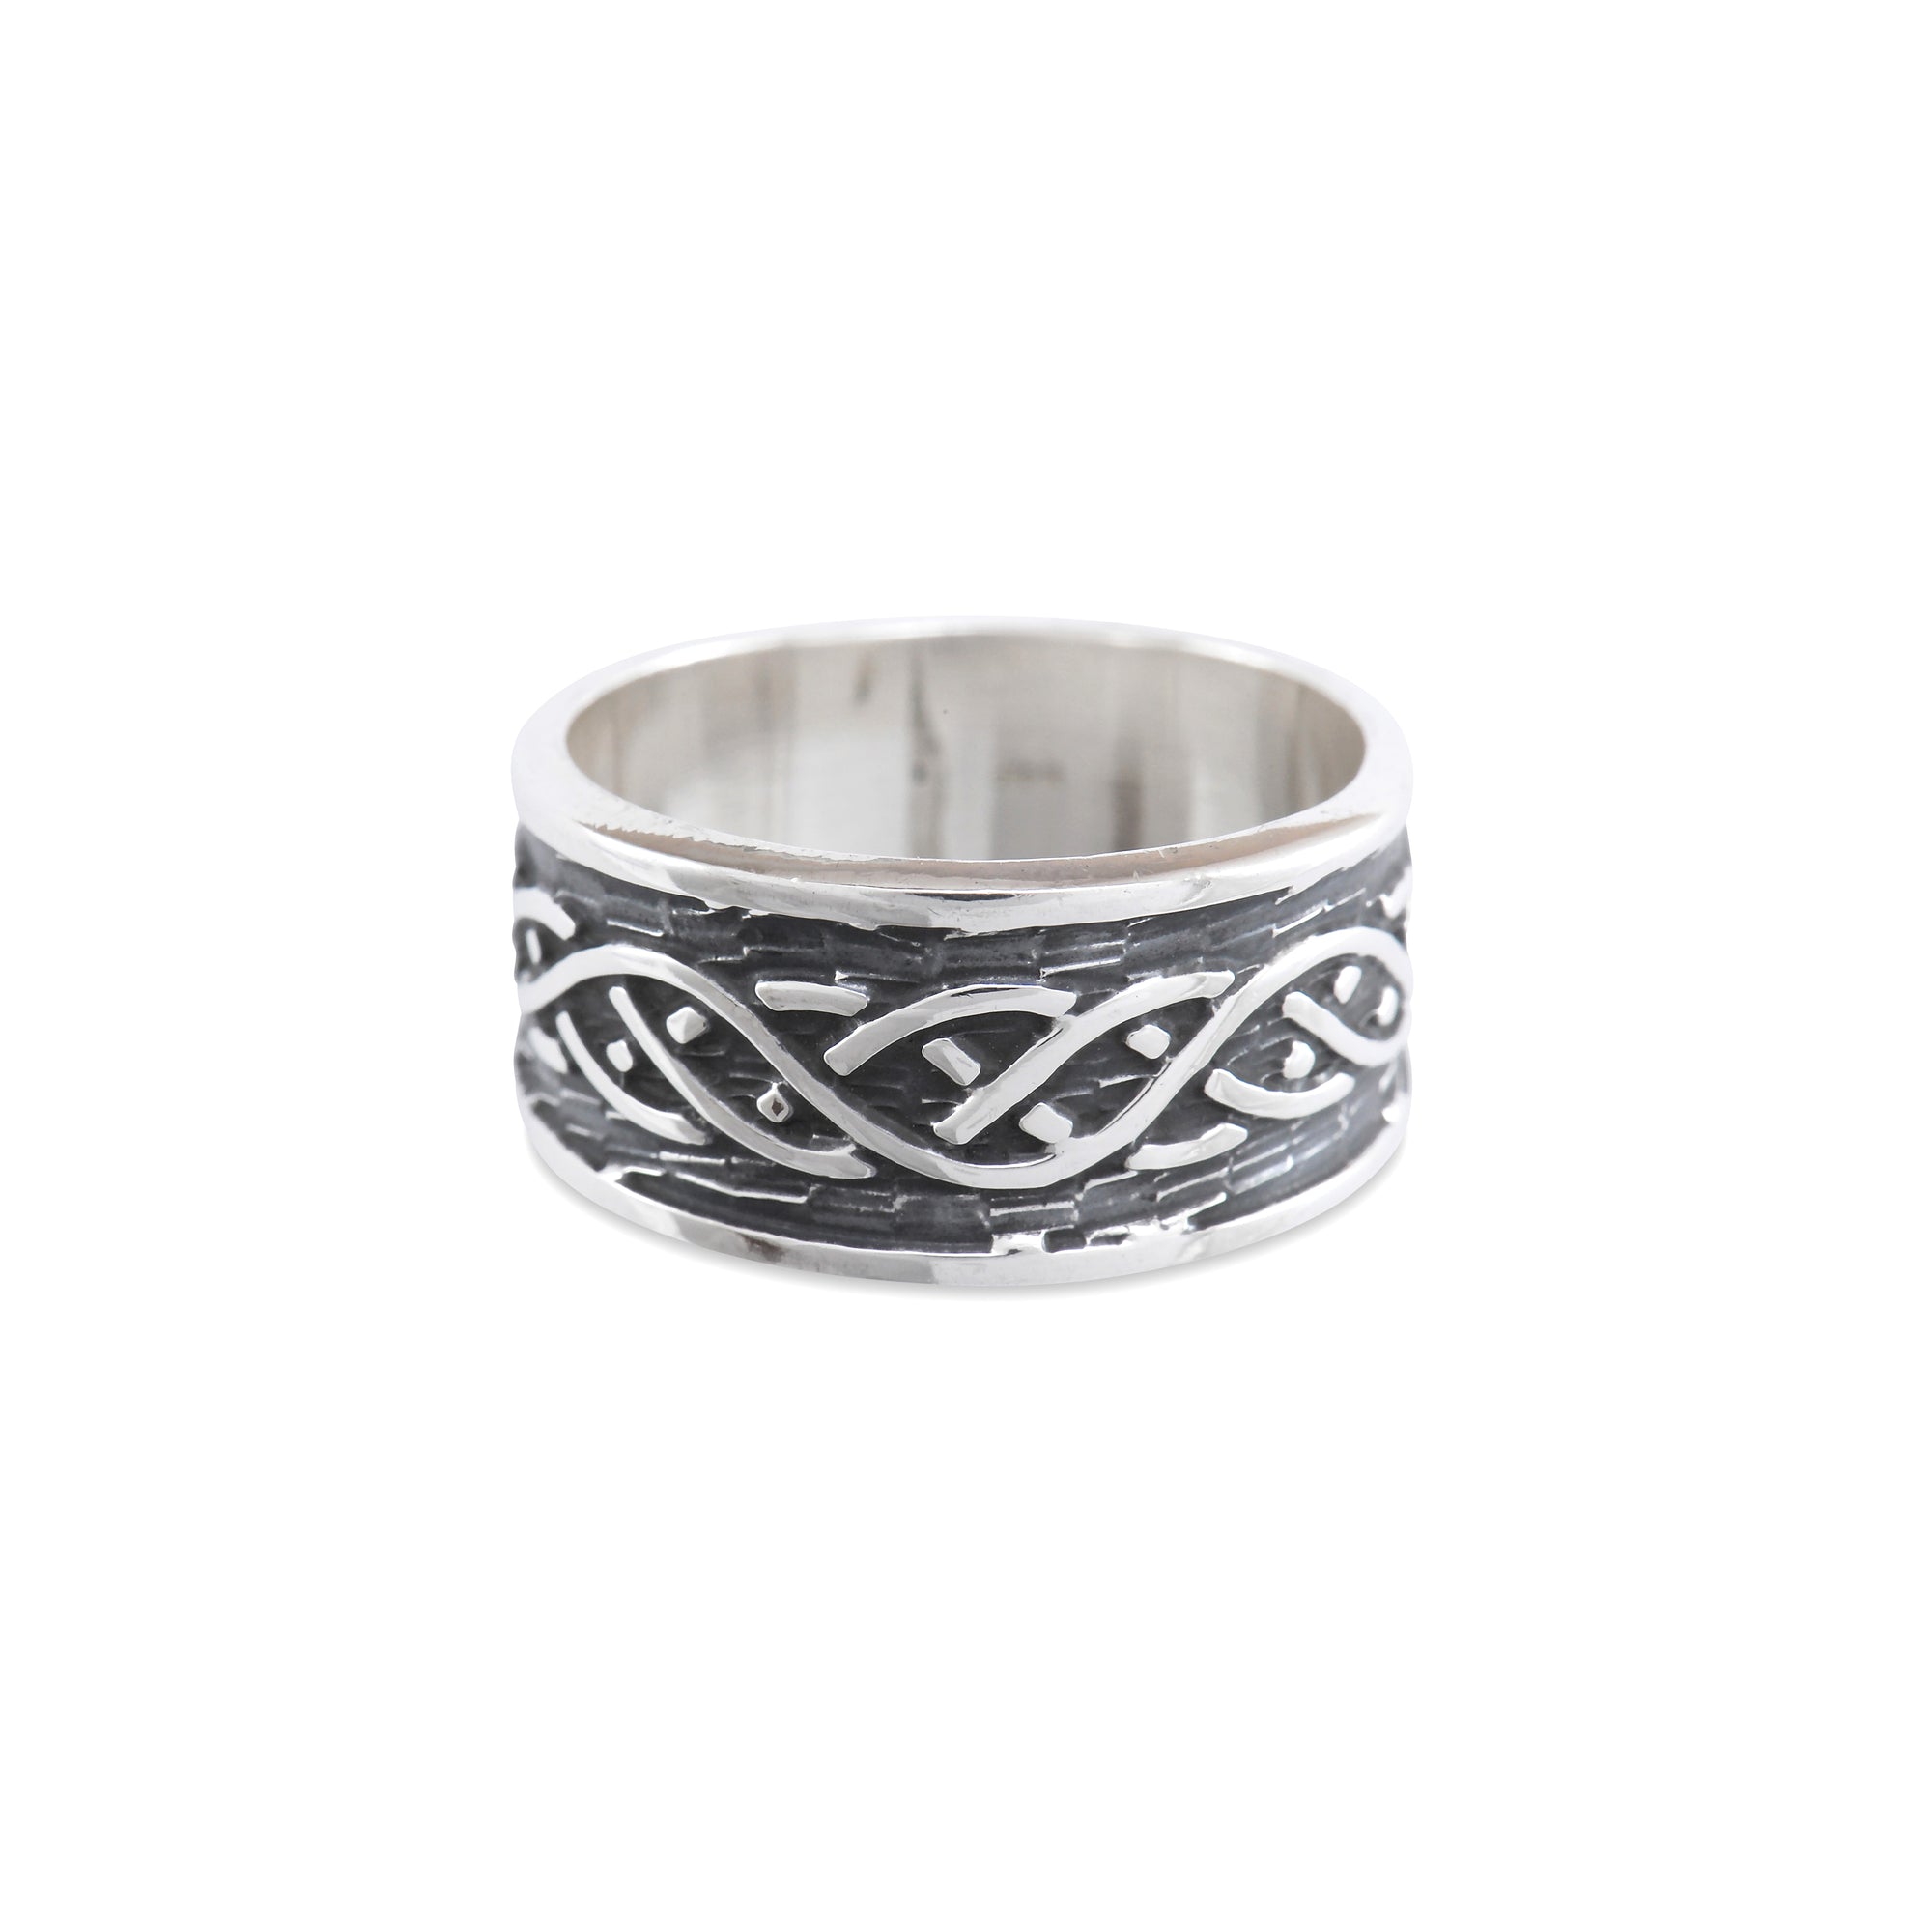 Silver ring with Celtic knot design